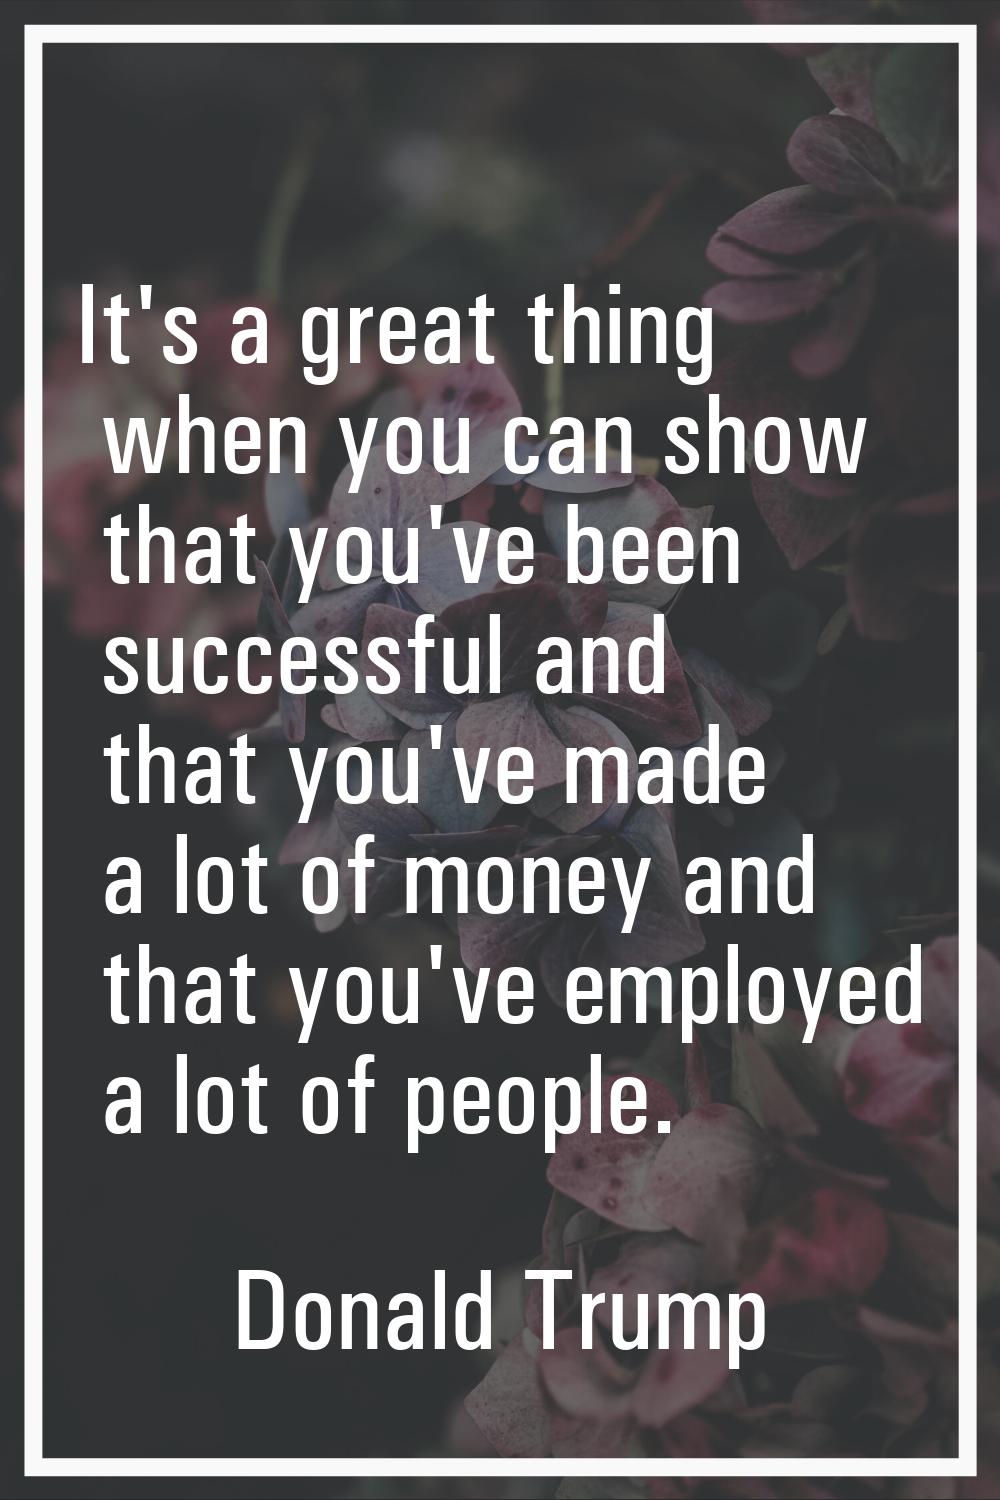 It's a great thing when you can show that you've been successful and that you've made a lot of mone